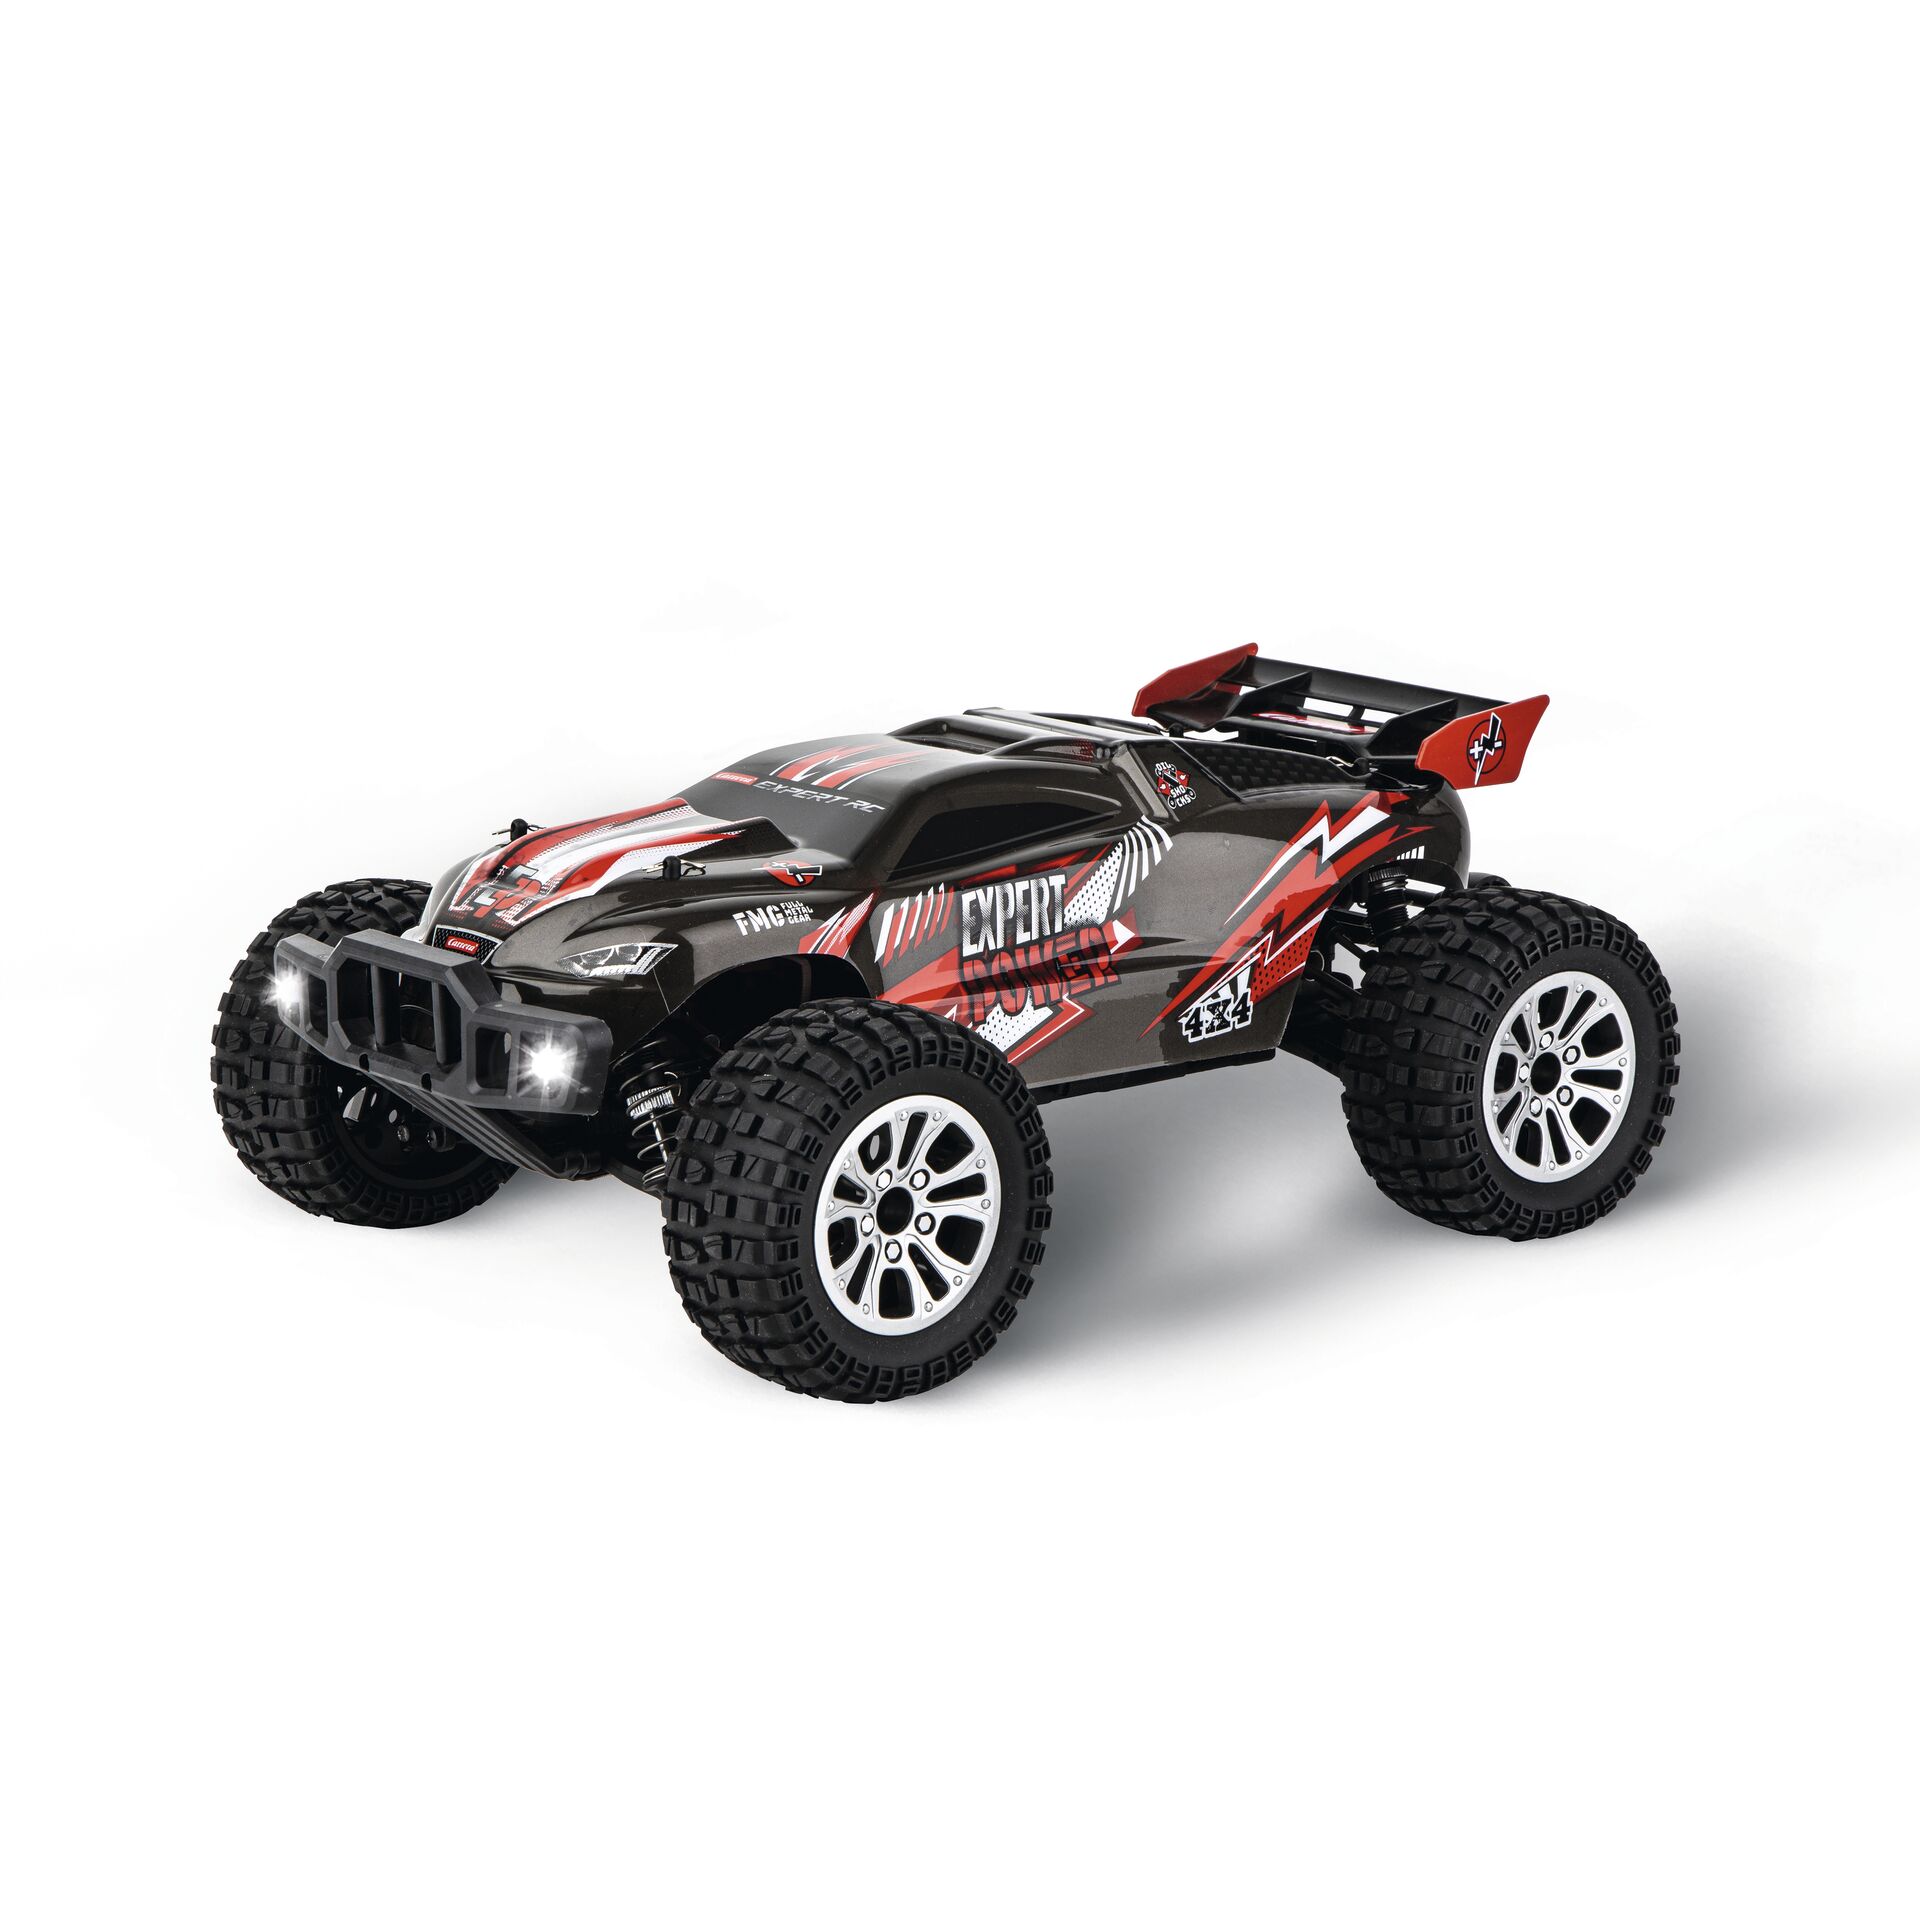 Carrera RC 2,4GHz      370102201 Brushless Buggy - Carrera E